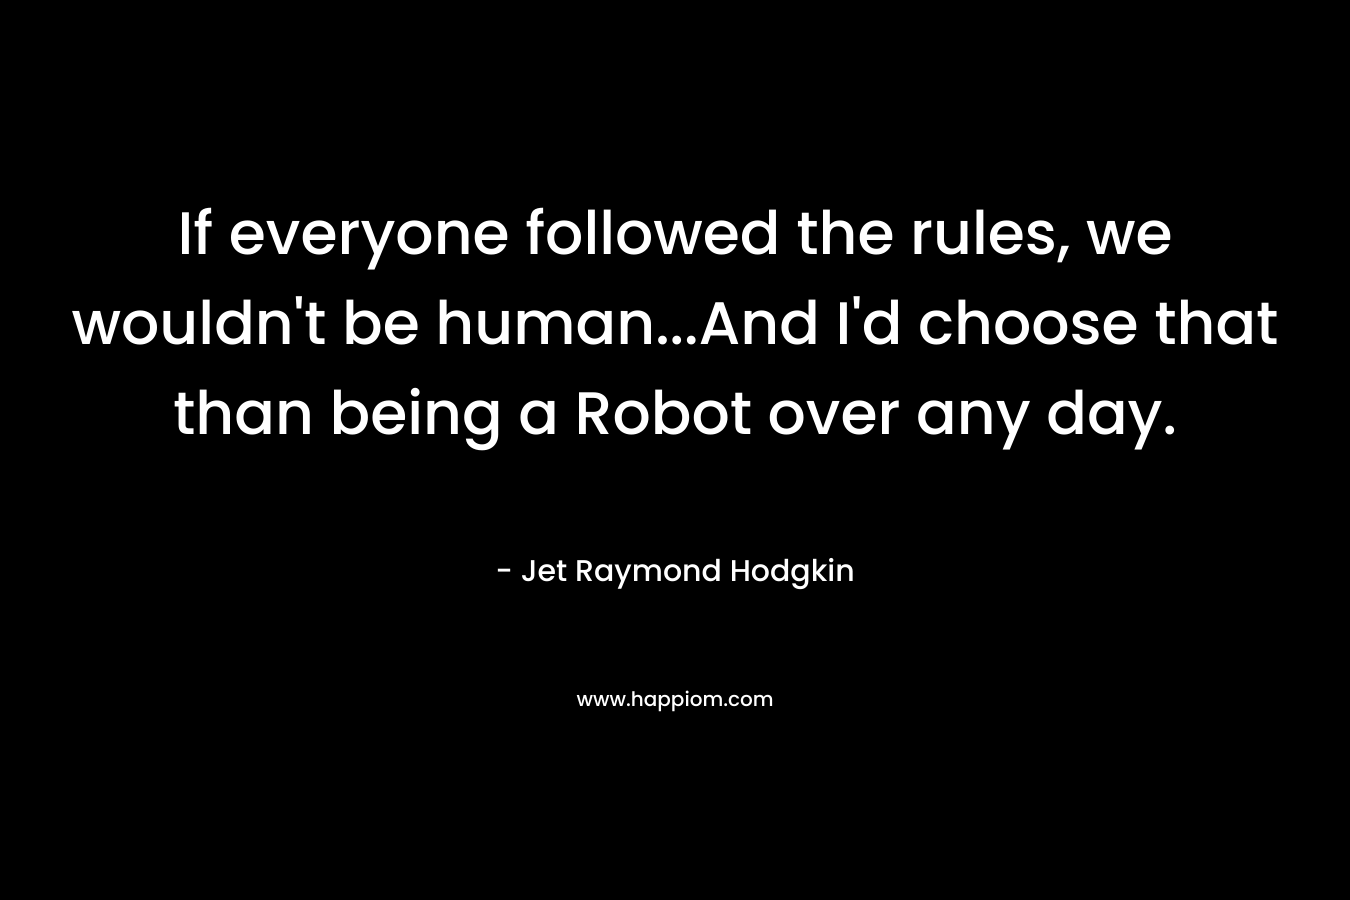 If everyone followed the rules, we wouldn’t be human…And I’d choose that than being a Robot over any day. – Jet Raymond Hodgkin